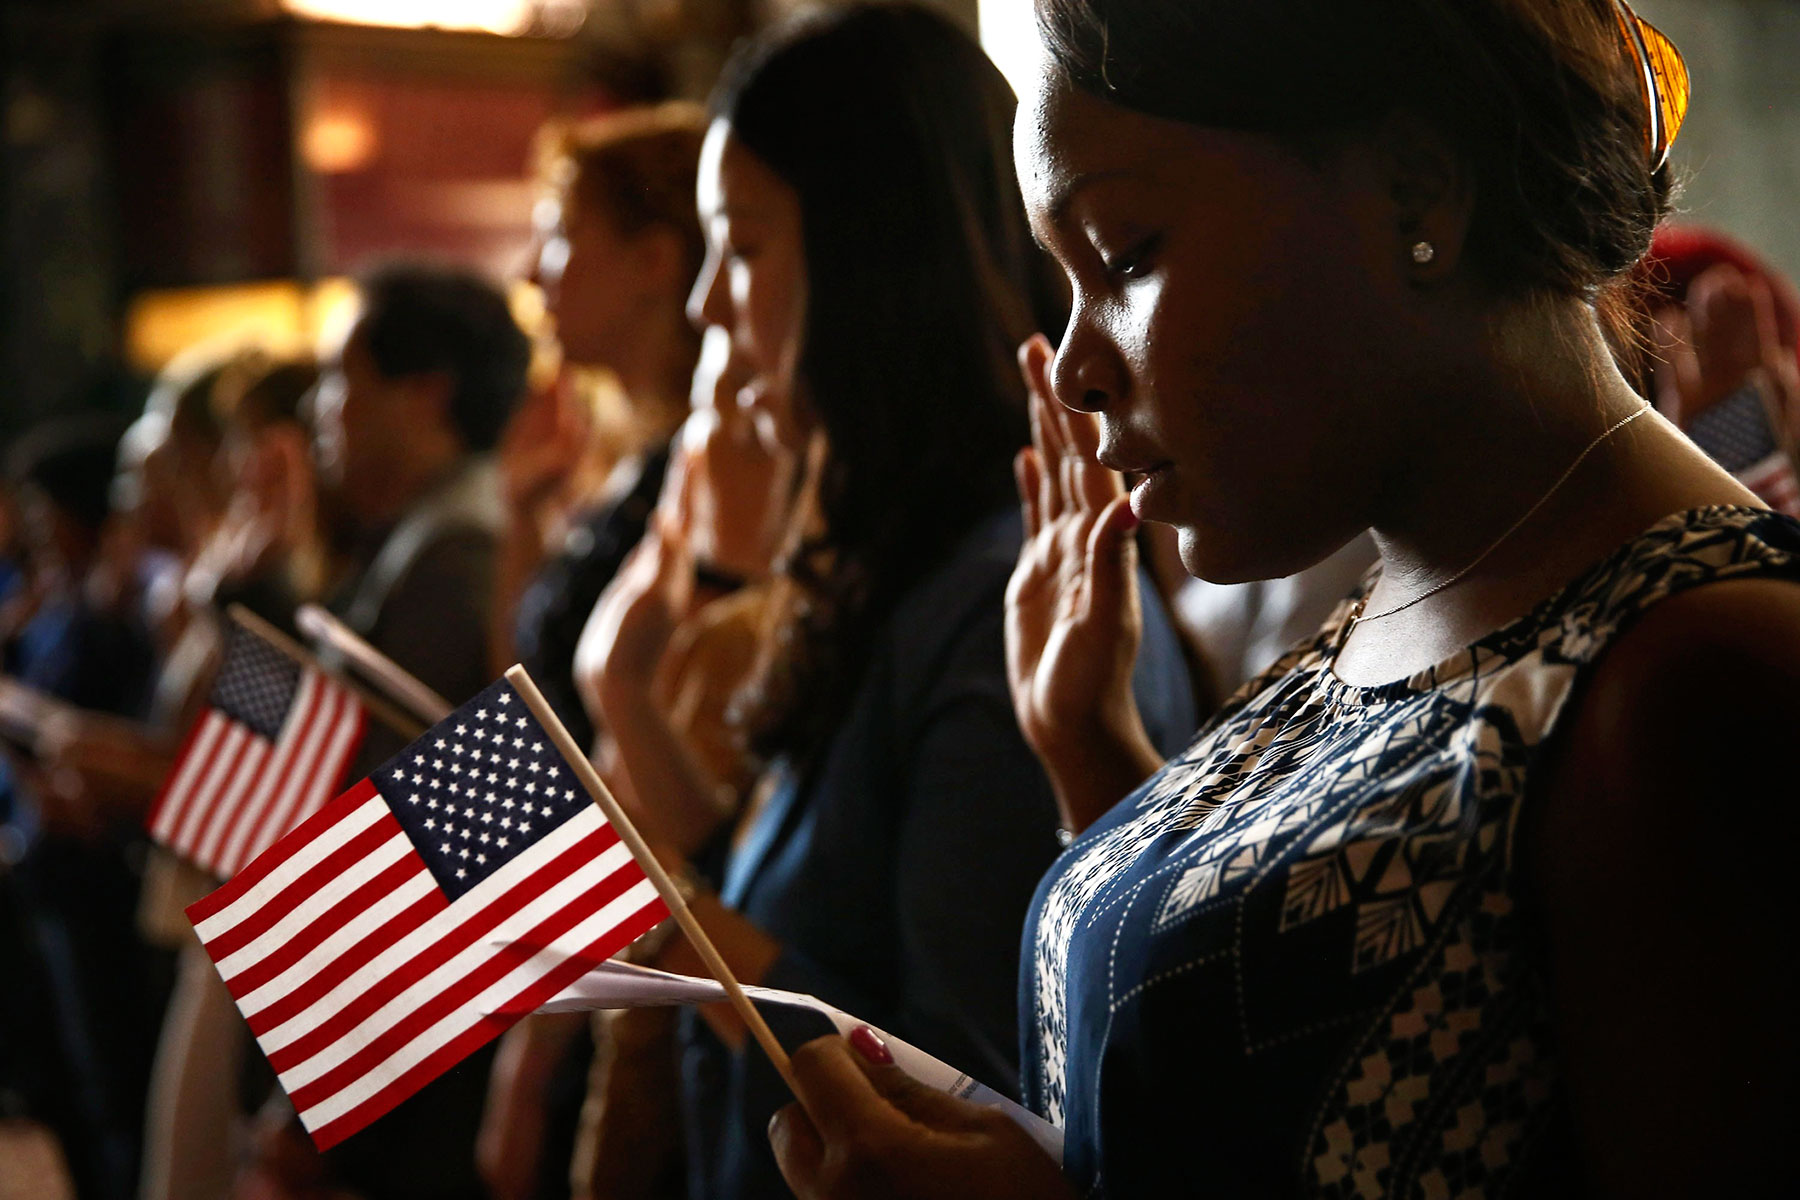 Vishaun Lawrence of Jamaica during a naturalization ceremony in Chicago last year. (Scott Olson / Getty Images)